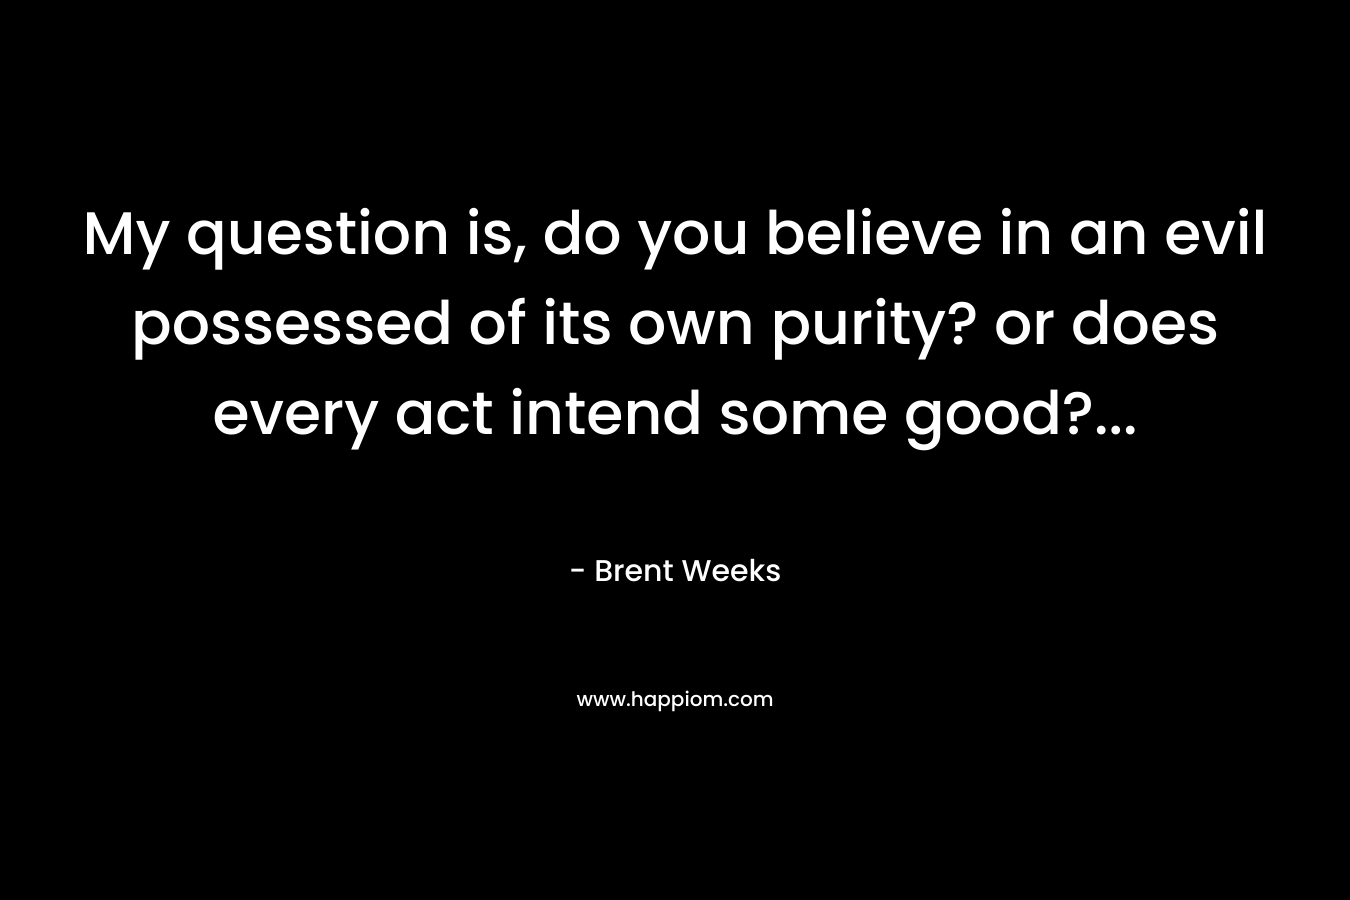 My question is, do you believe in an evil possessed of its own purity? or does every act intend some good?...